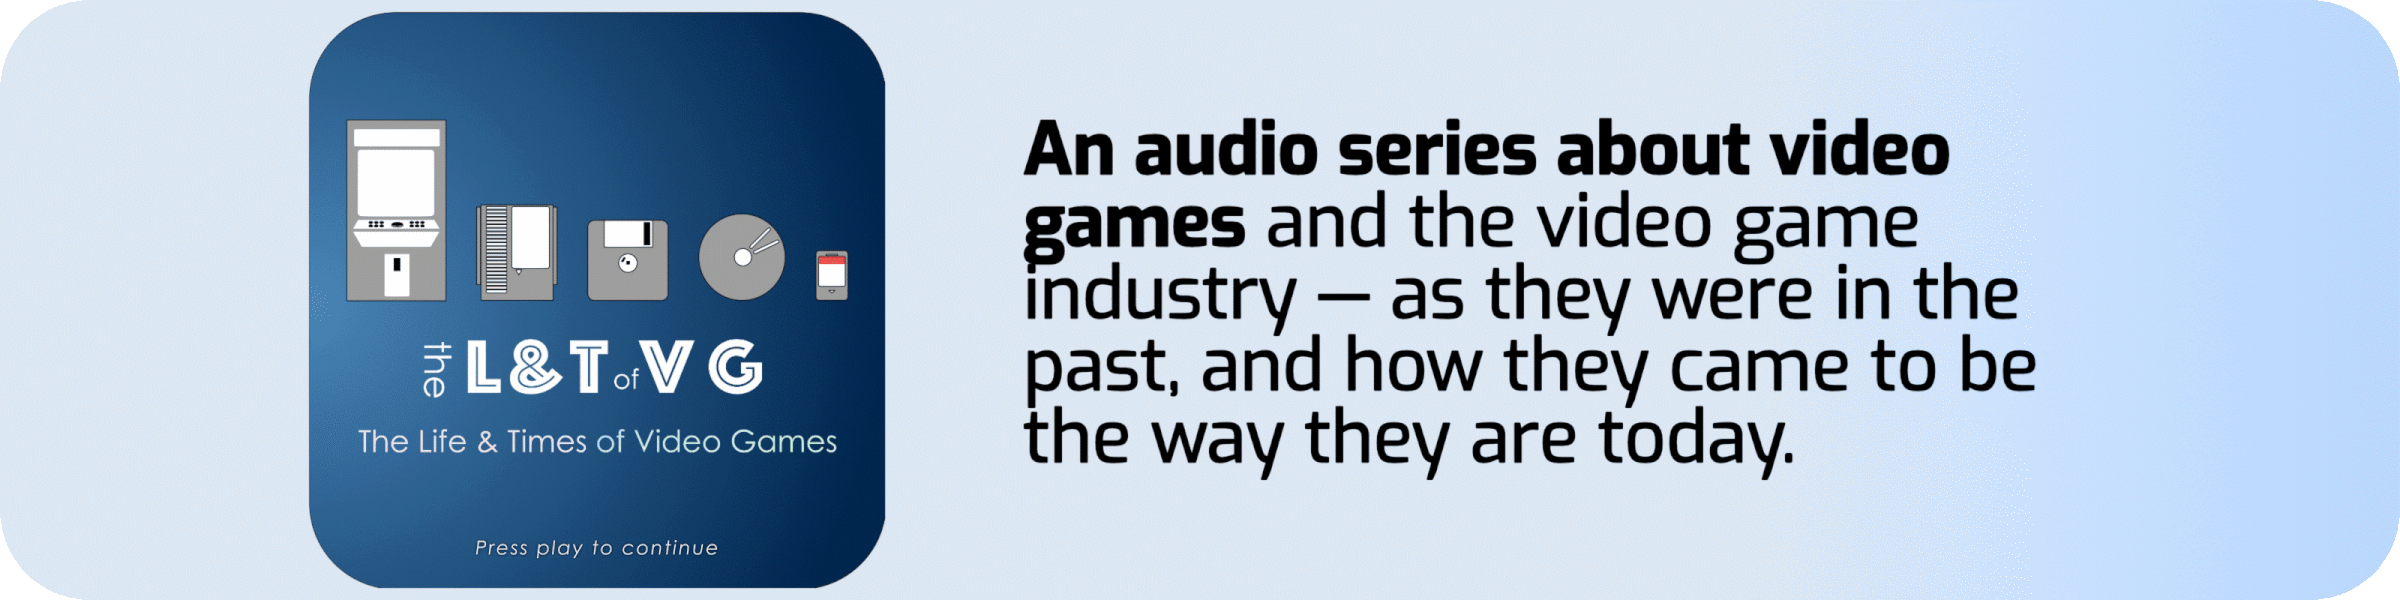 The Life & Times of Video Games: A documentary and narrative-style audio series about video games and the video game industry — as they were in the past, and how they came to be the way they are today.